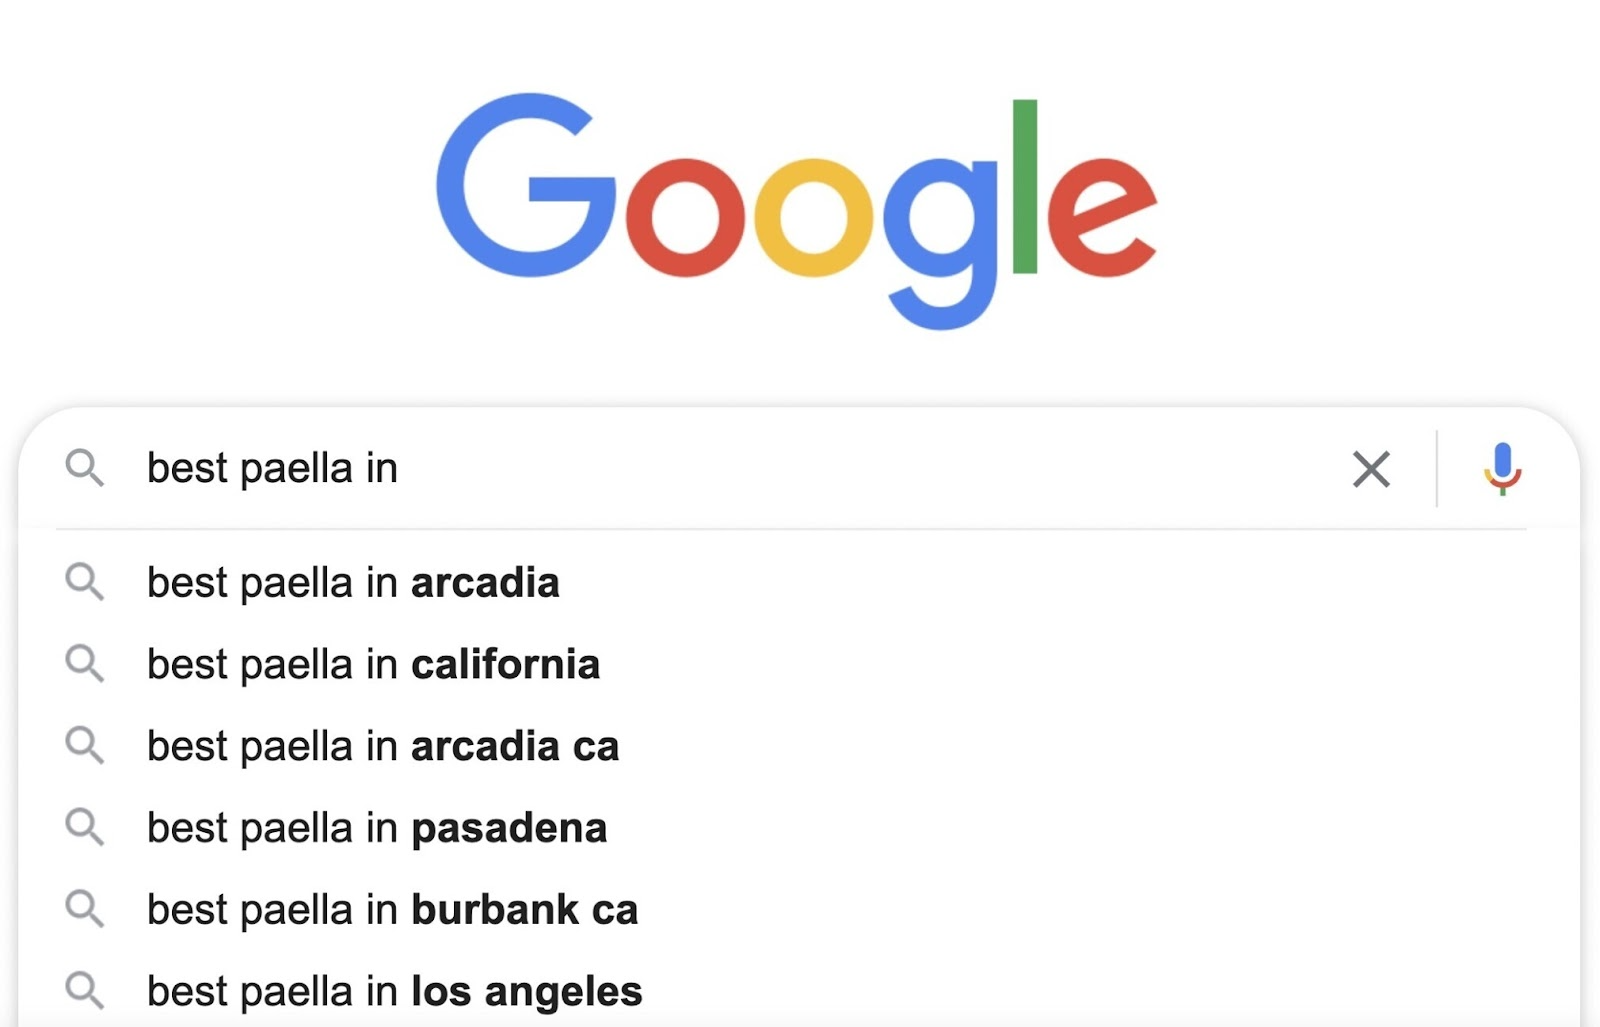 Google Autocomplete suggestions for “best paella in” in Arcadia, California